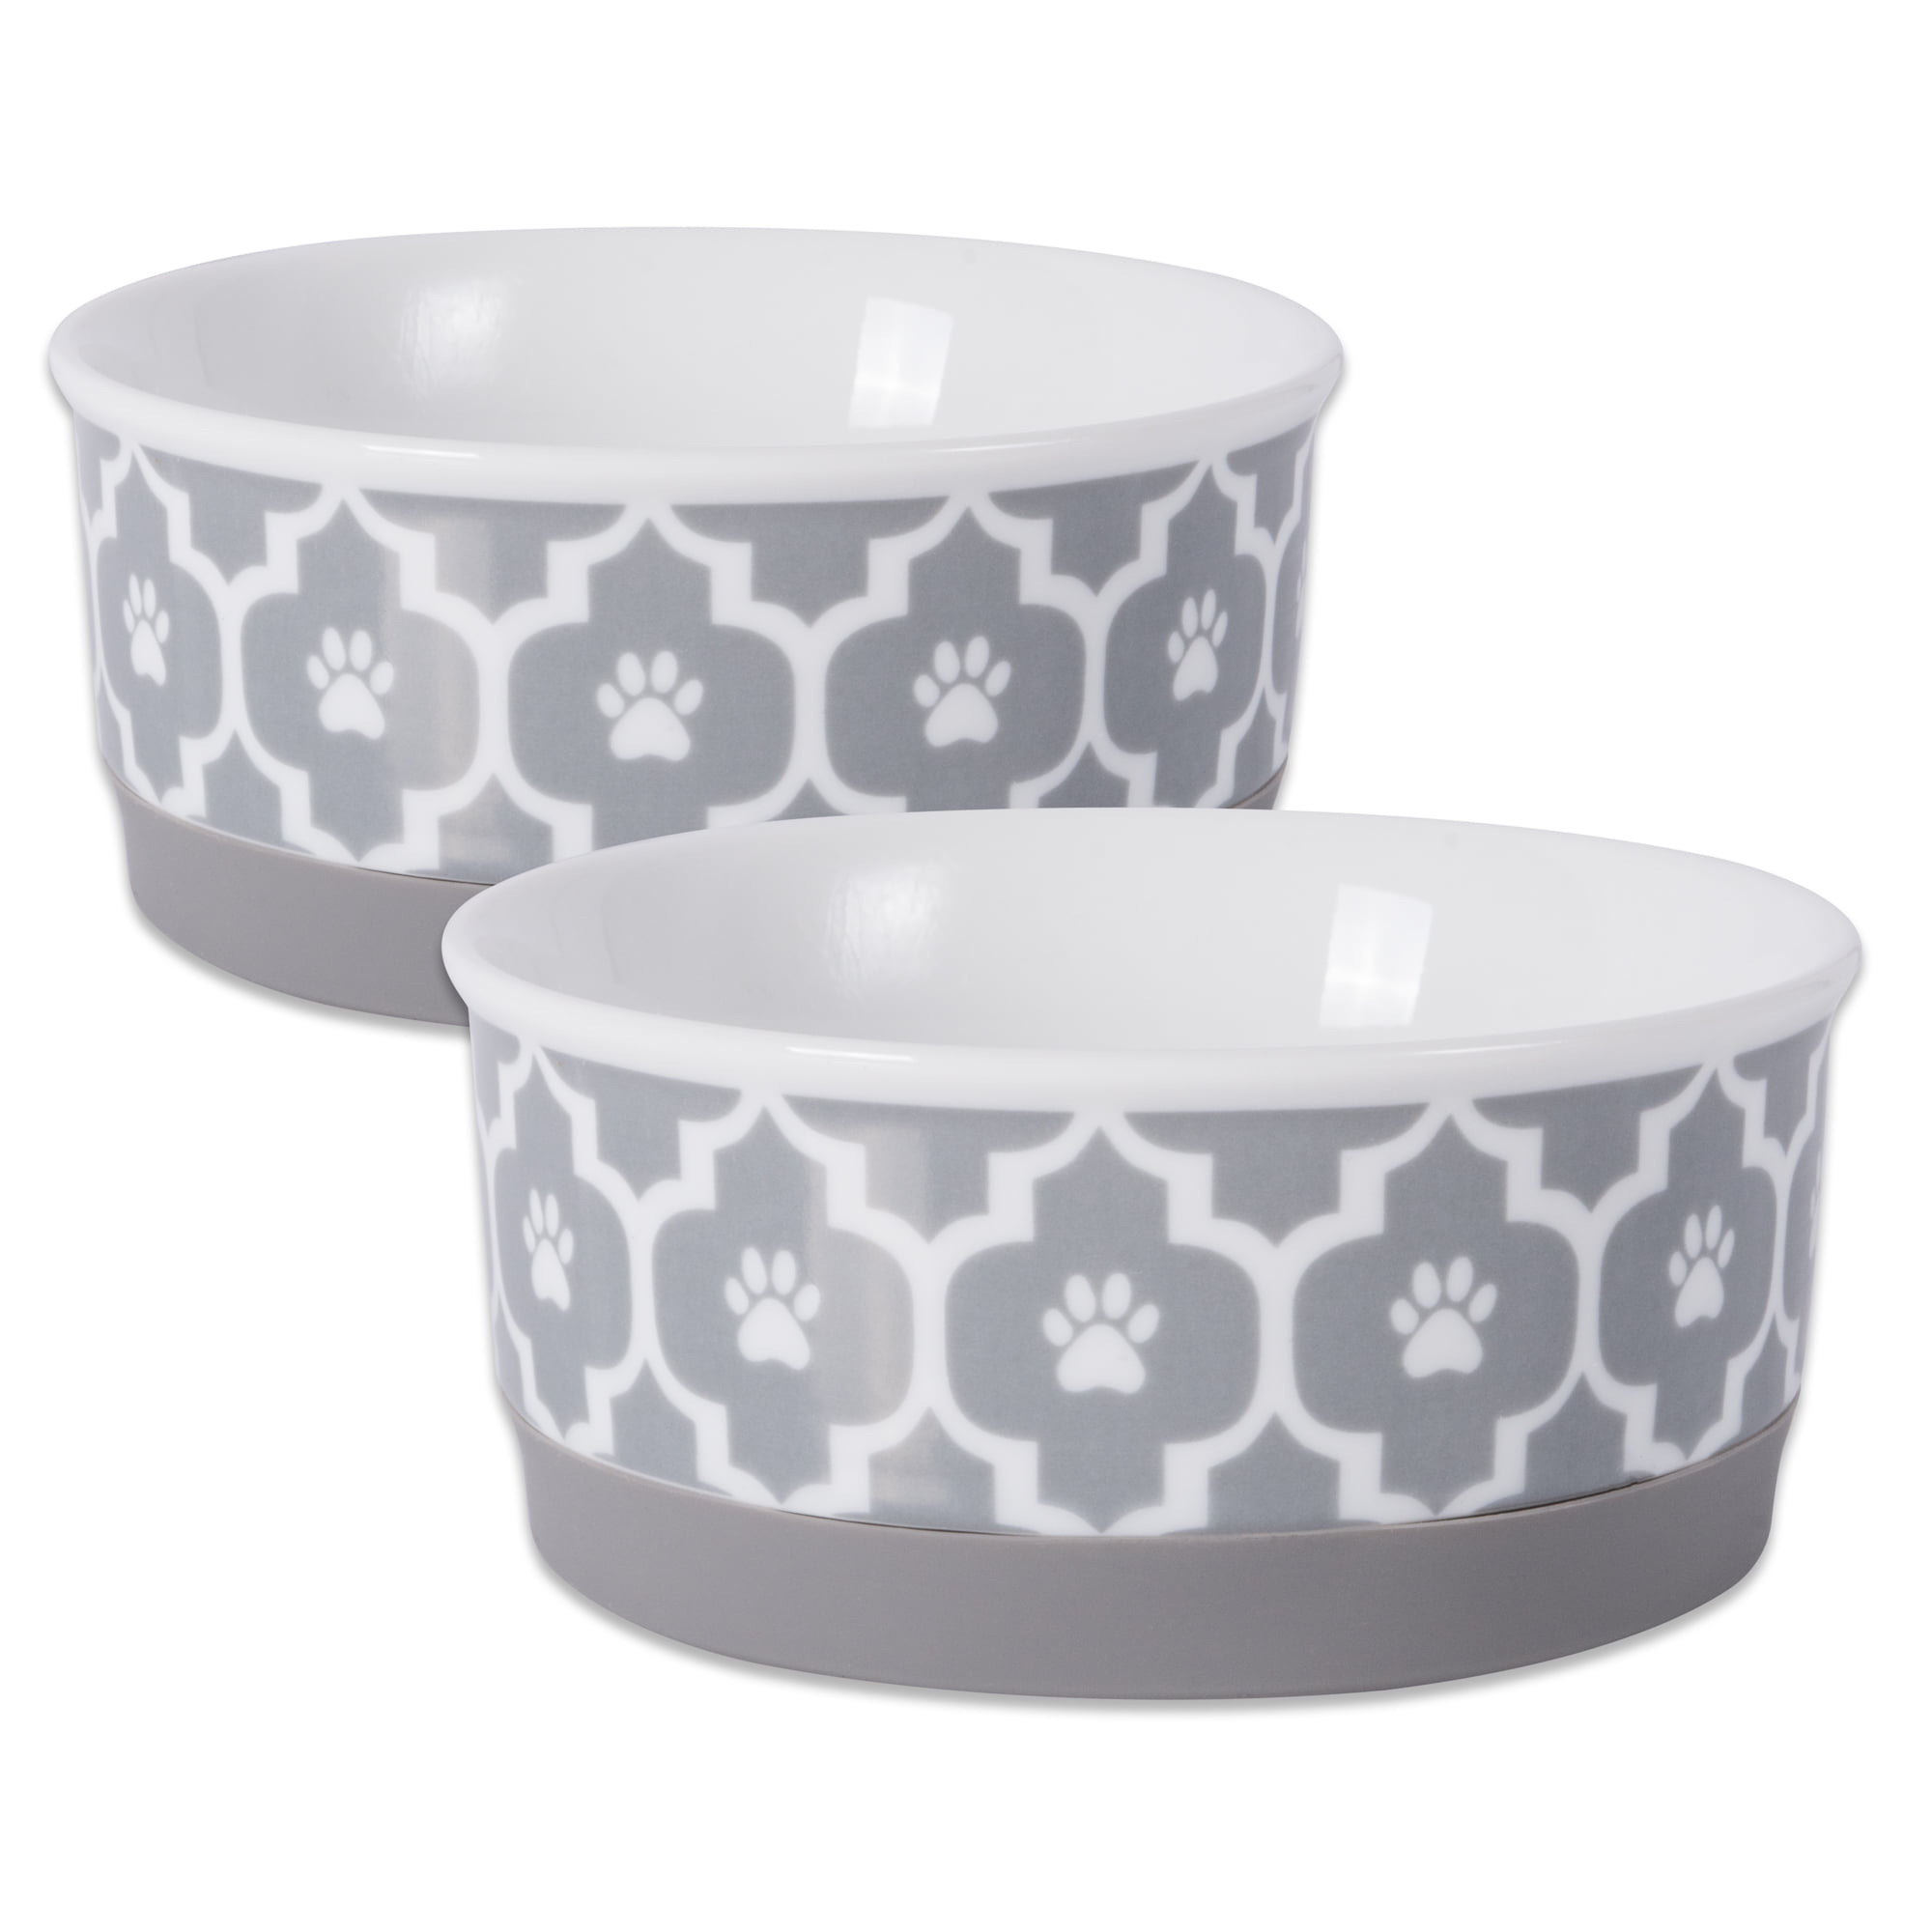 Picture of Design Imports CAMZ37236 4.25 x 2 in. Lattice Pet Bowl, Grey - Small - Set of 2